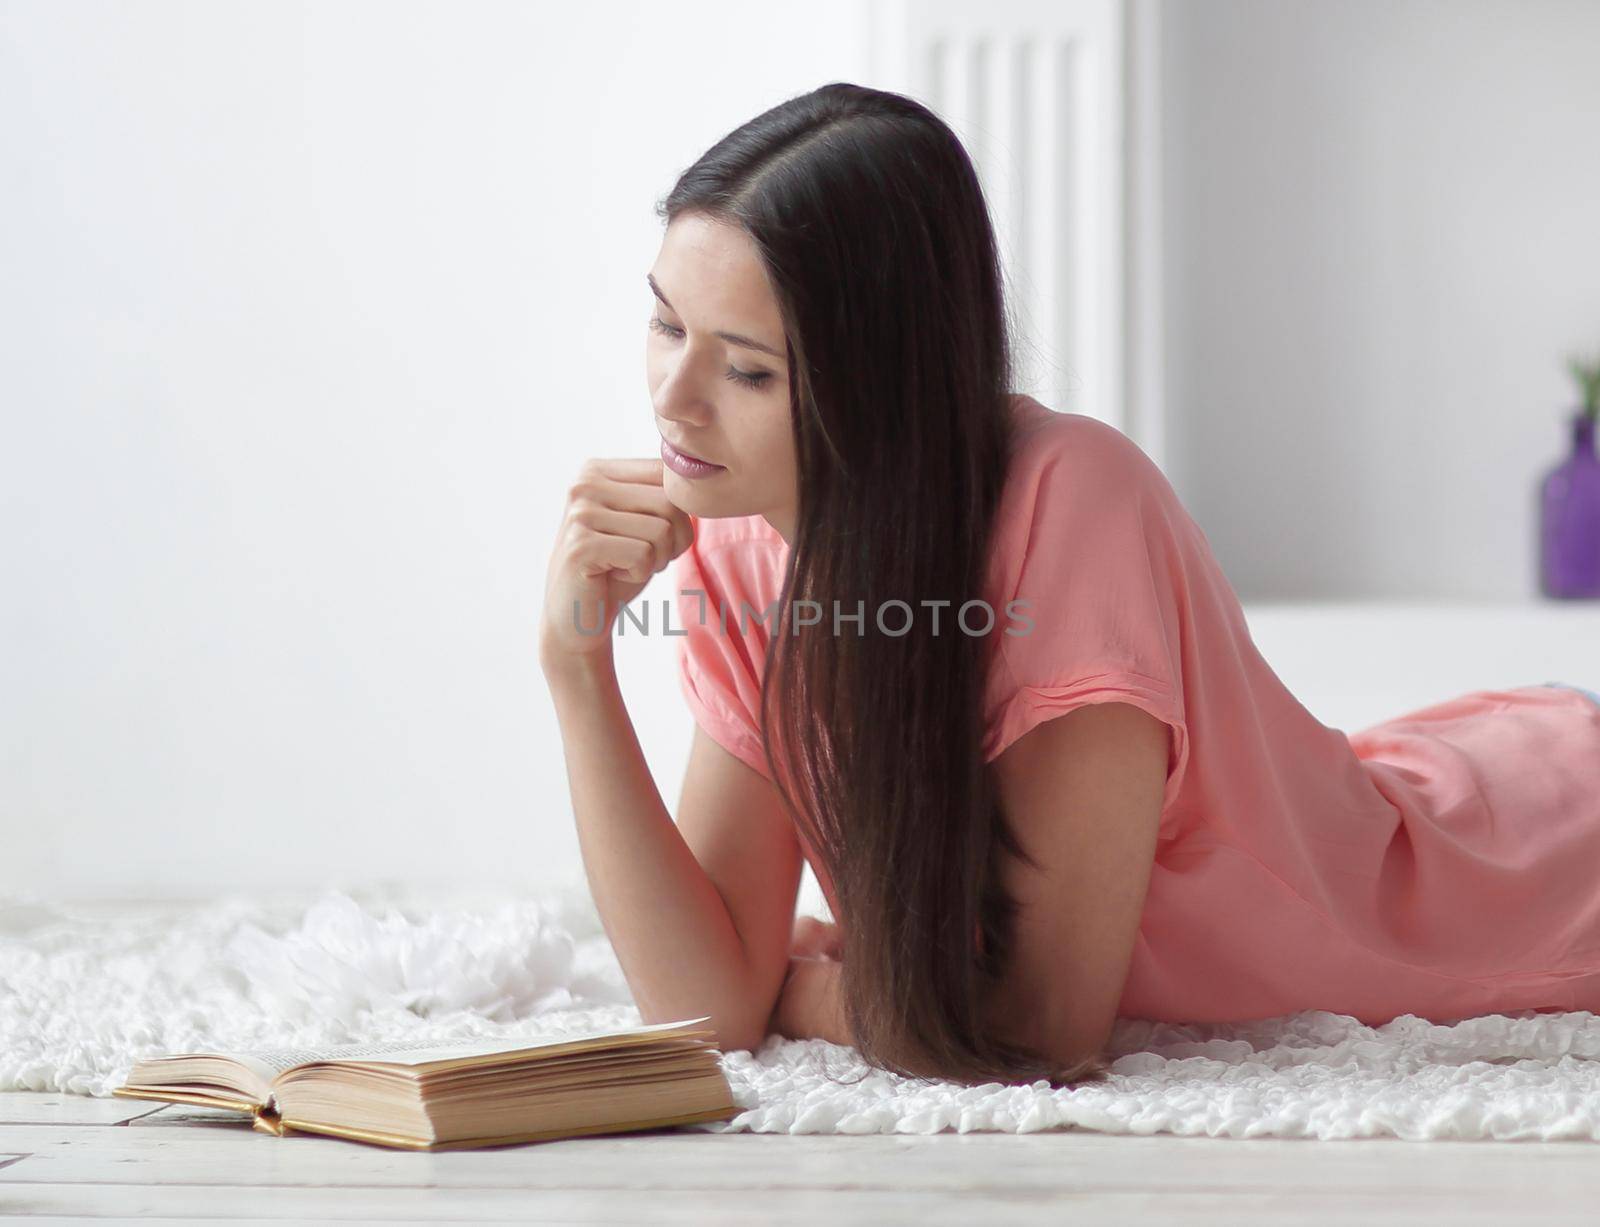 portrait of young girl reading book lying on floor in living room.